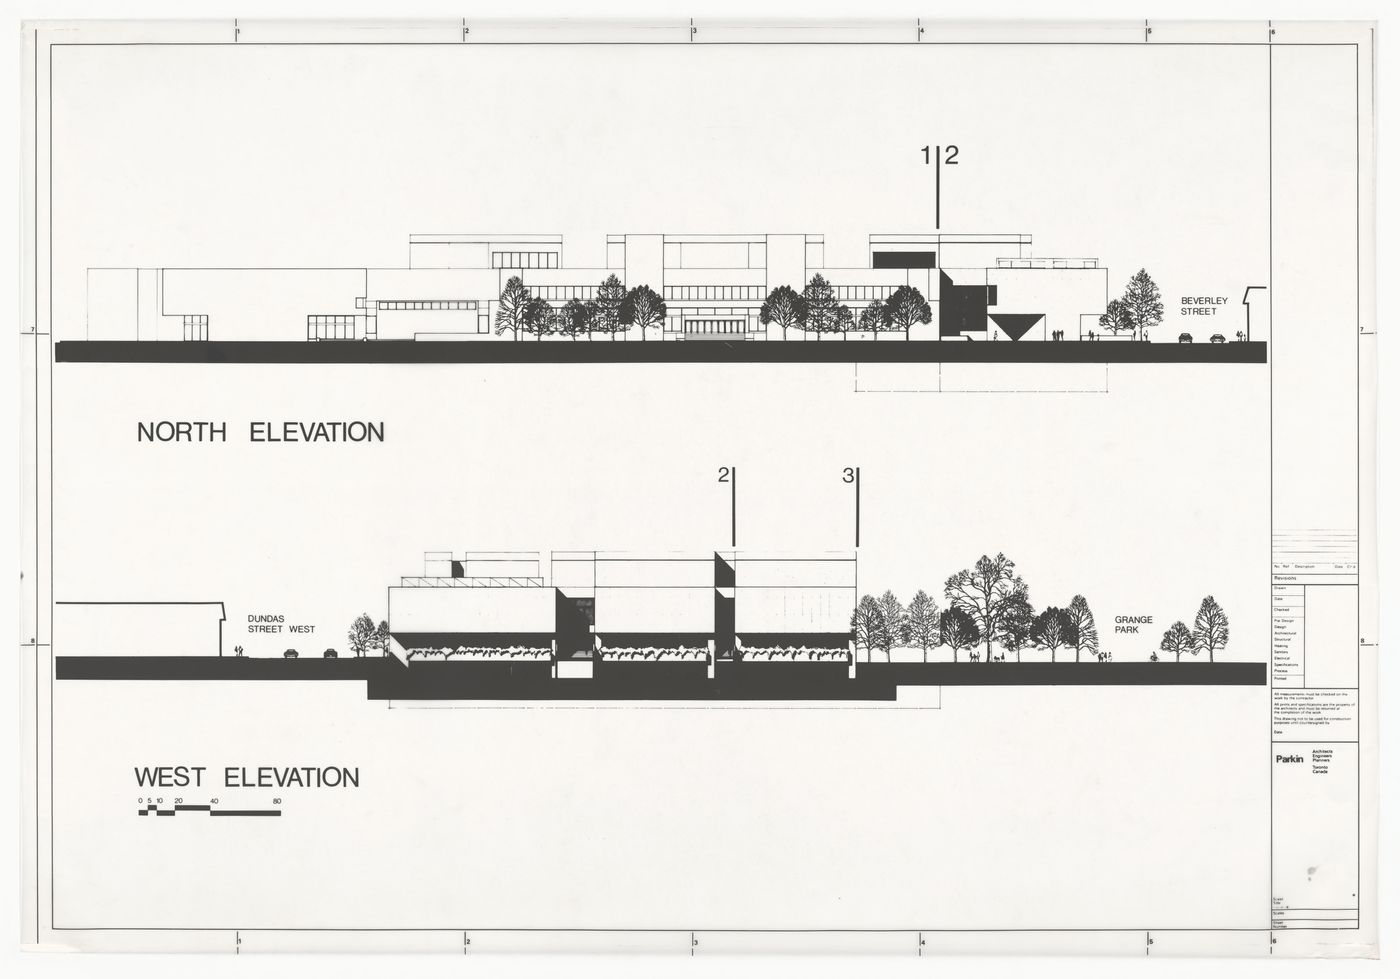 North and west elevations for Art Gallery of Ontario, Stage II Expansion, Toronto